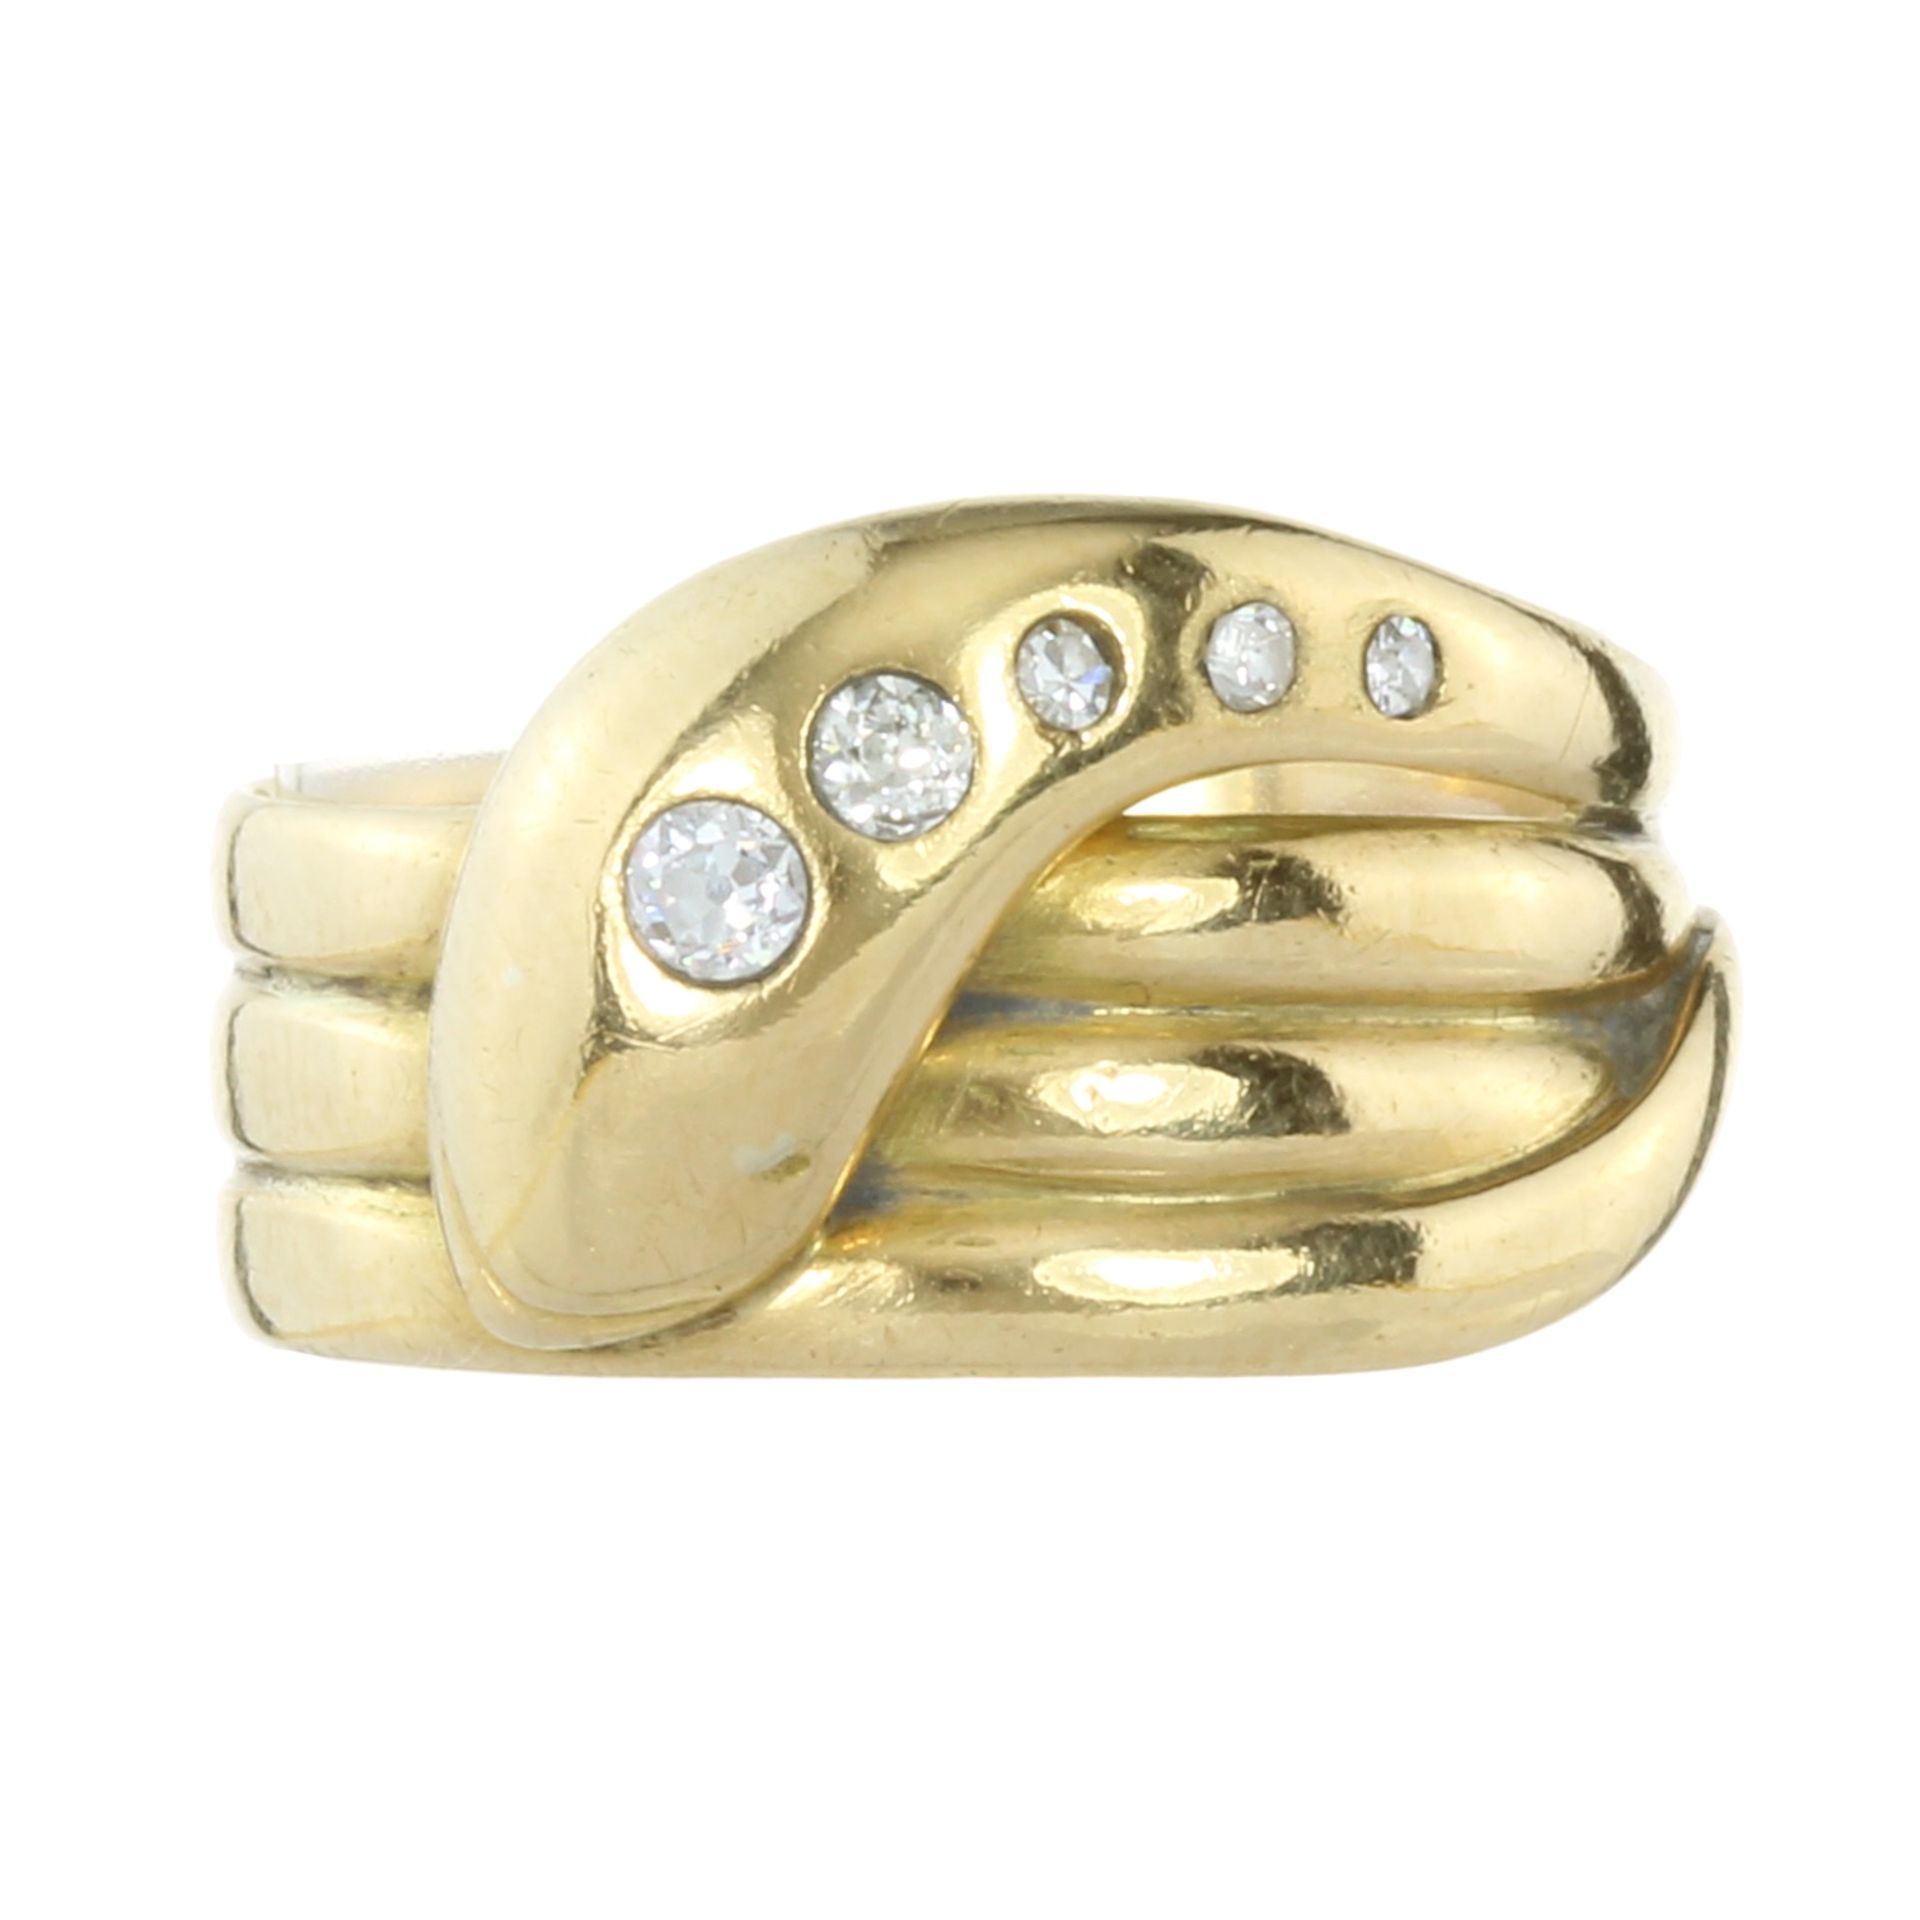 AN ANTIQUE DIAMOND SNAKE RING, 1918 in 18ct yellow gold designed as the body of a snake coiled